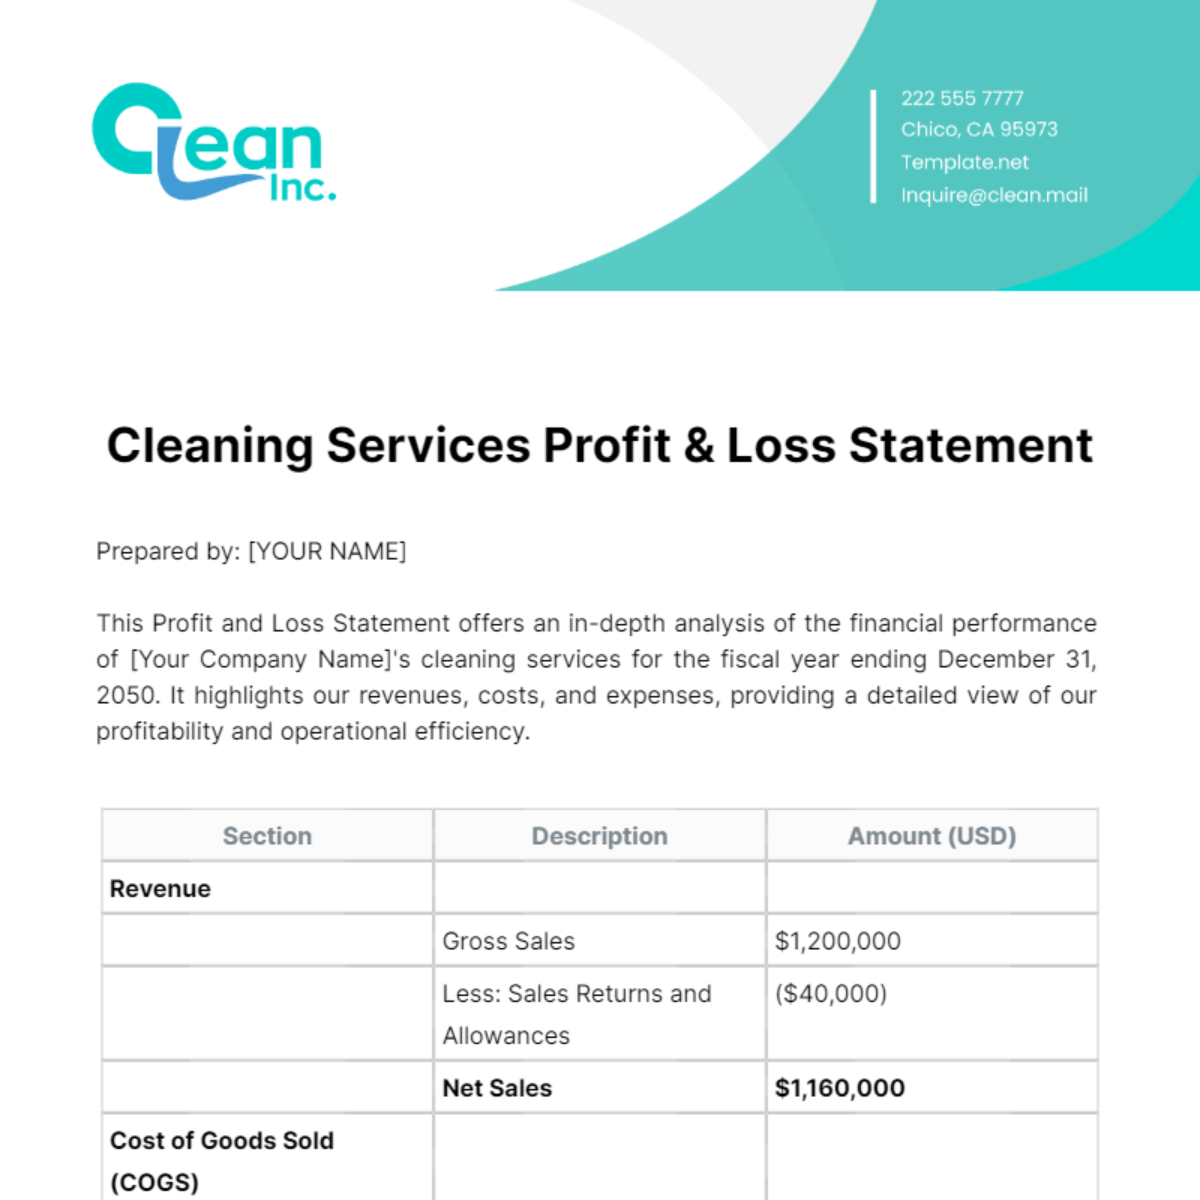 Cleaning Services Profit & Loss Statement Template